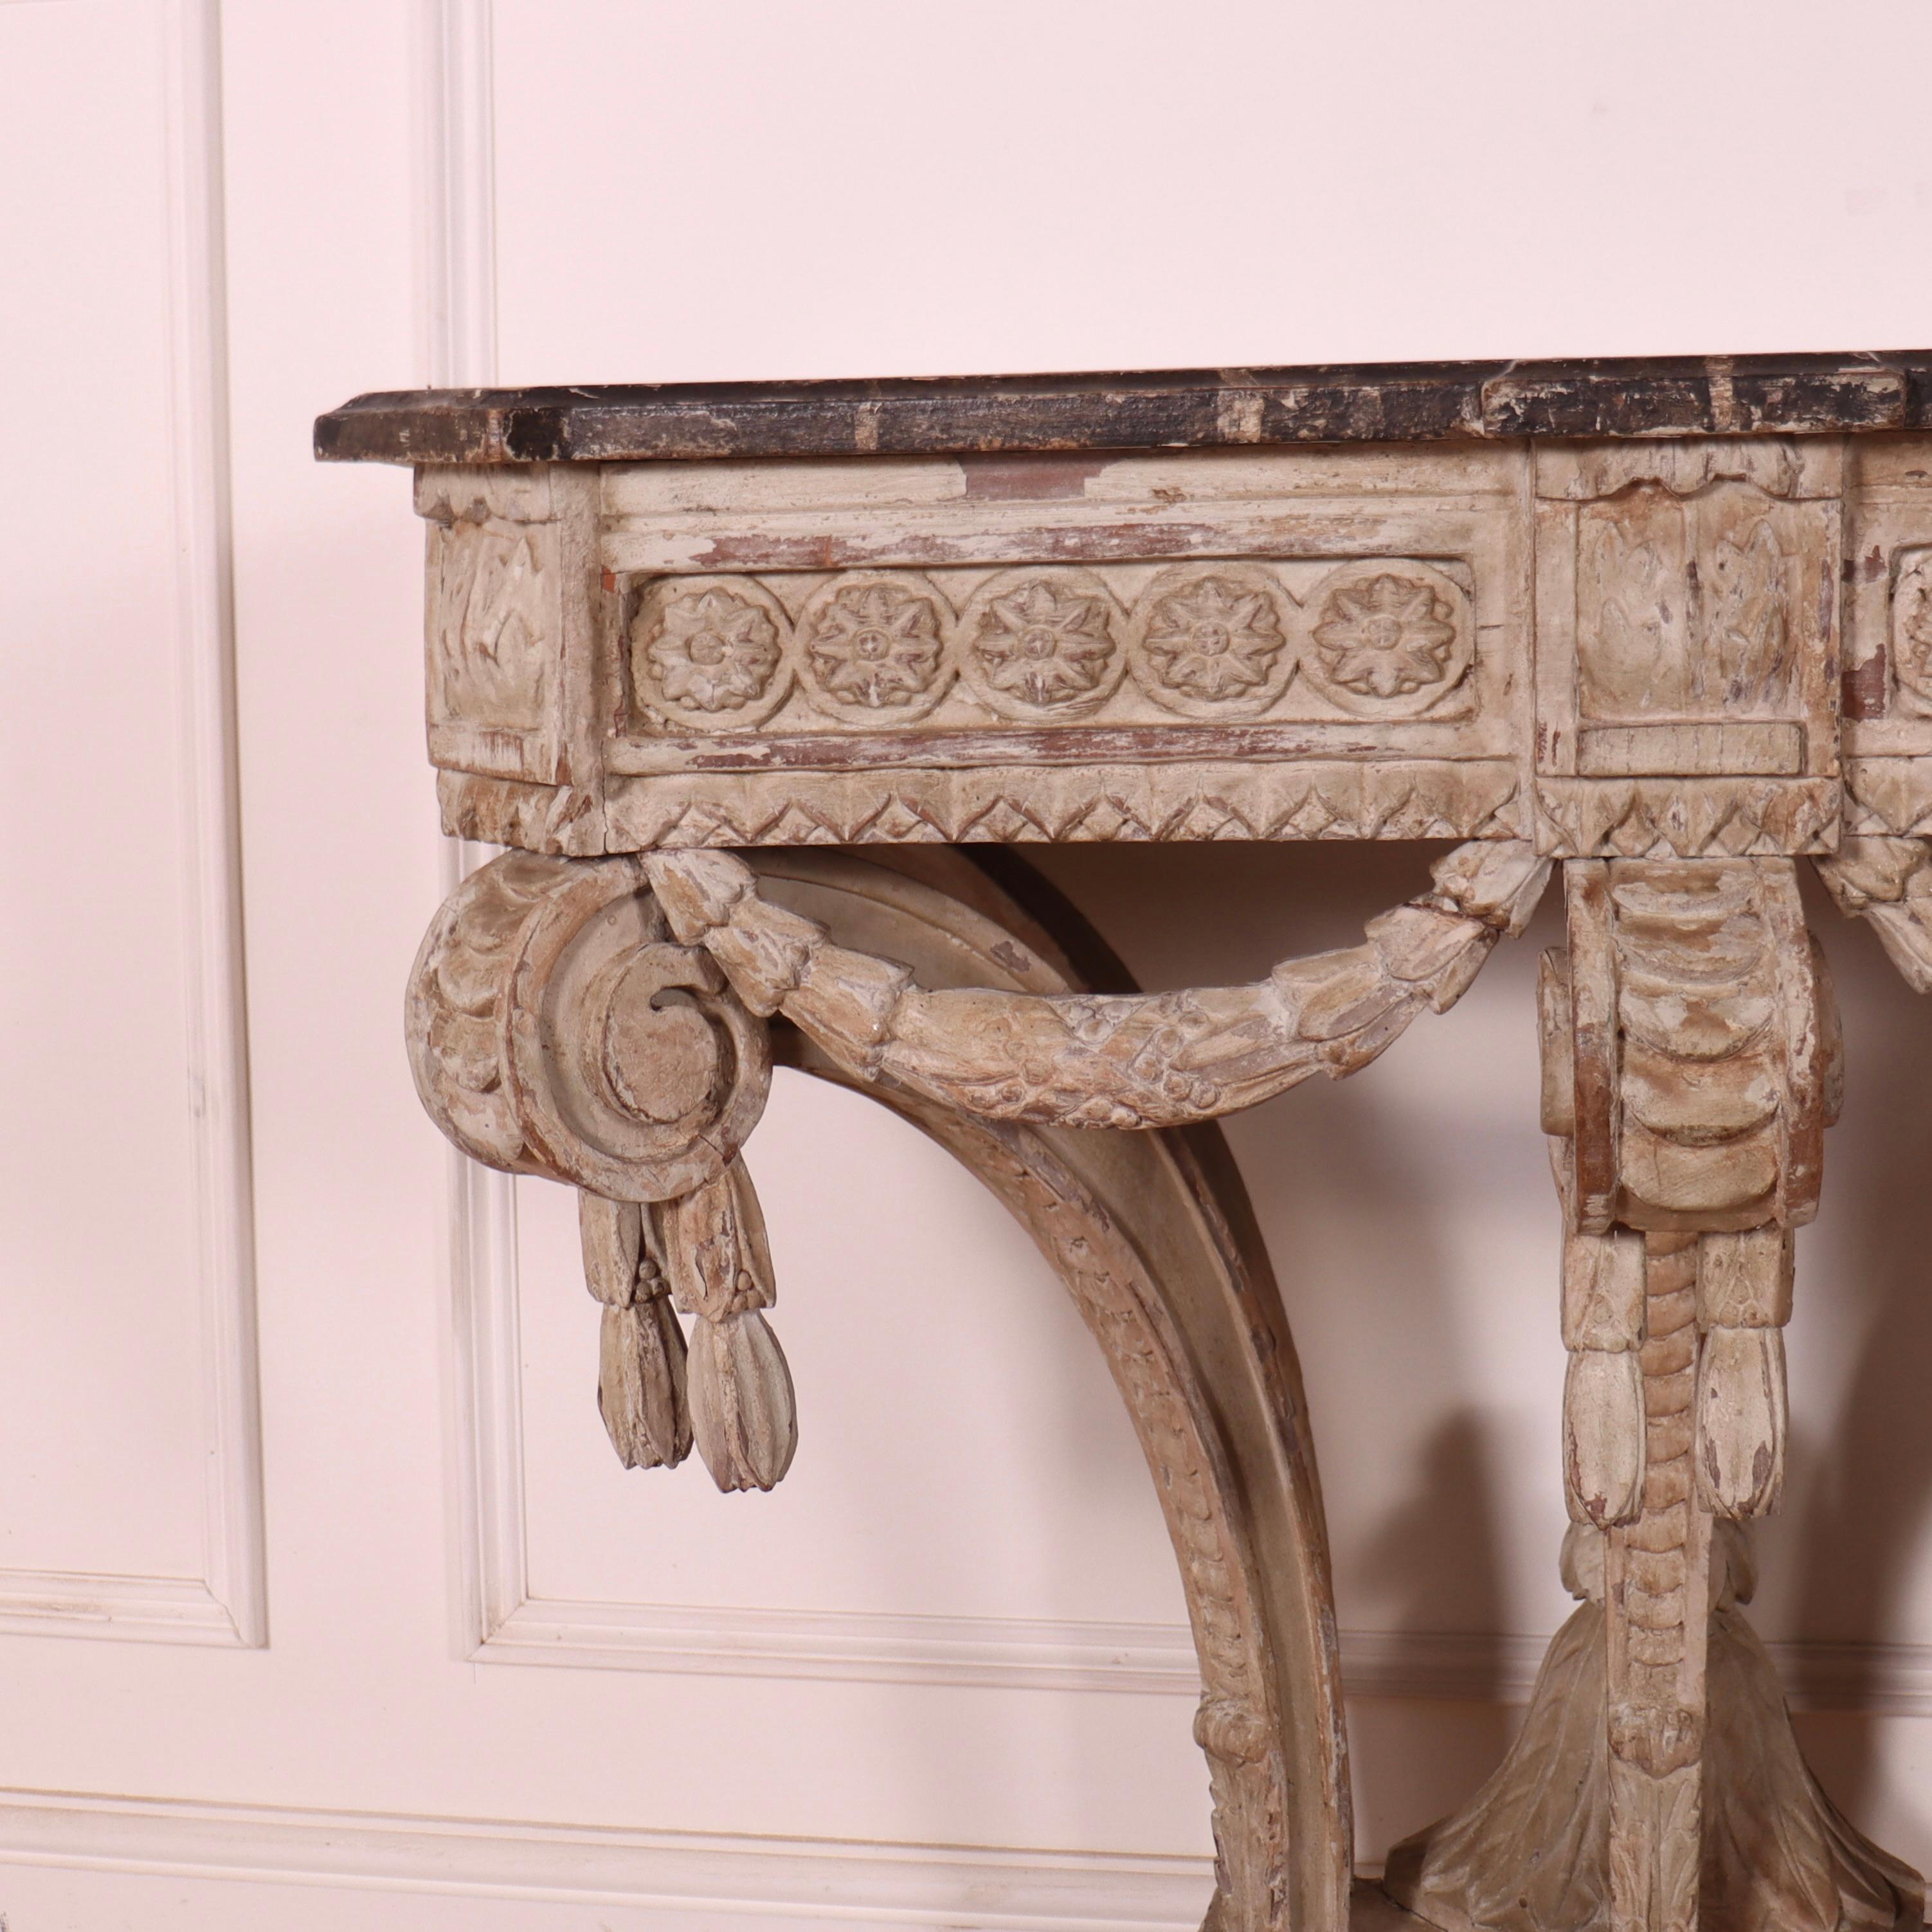 Pretty late 18th Century French painted console table with a faux marble top. All carved wood. 1780.

Dimensions
34 inches (86 cms) Wide
20 inches (51 cms) Deep
32 inches (81 cms) High.